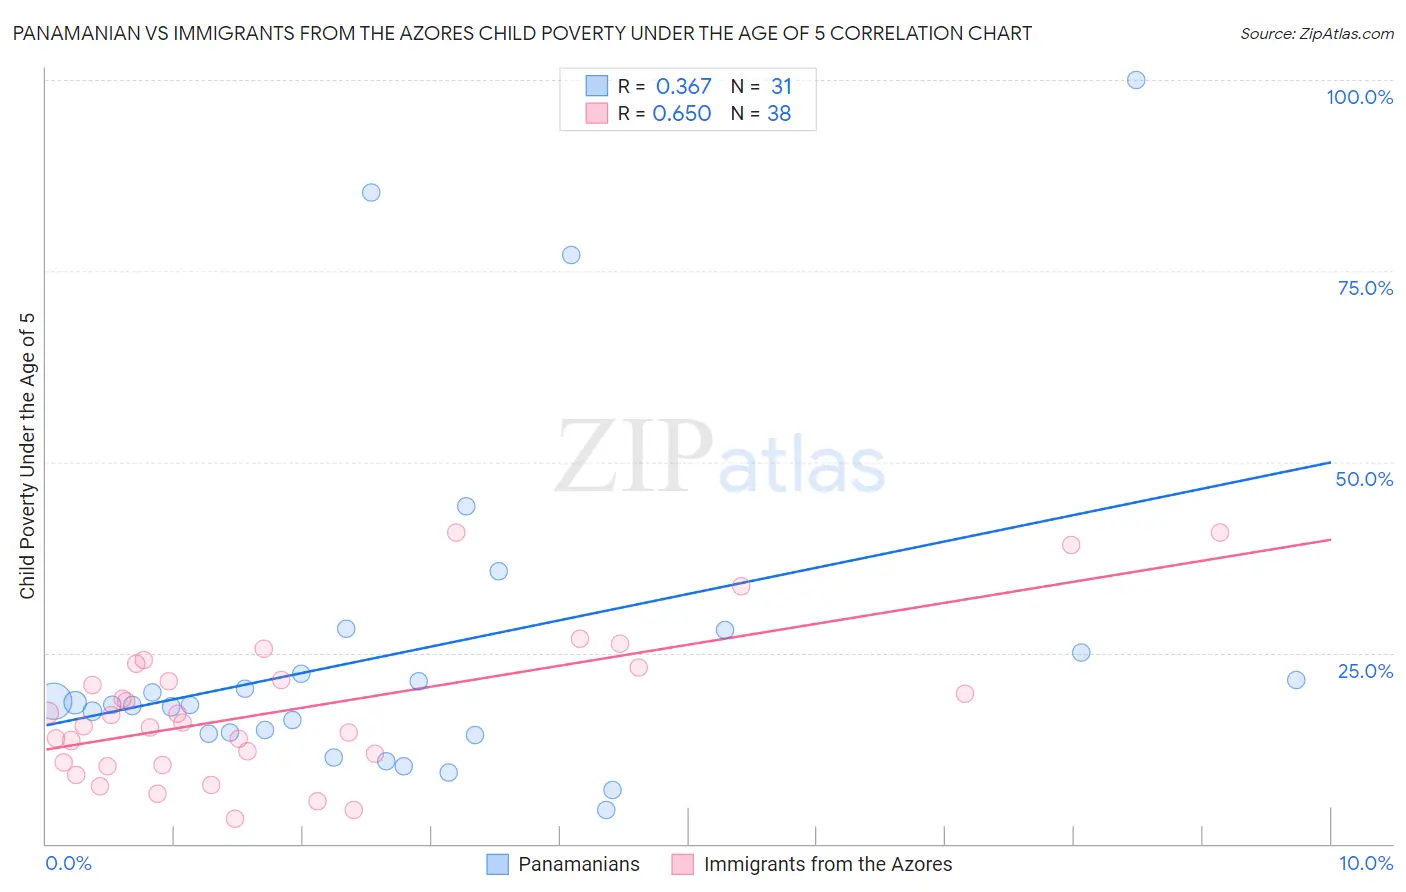 Panamanian vs Immigrants from the Azores Child Poverty Under the Age of 5